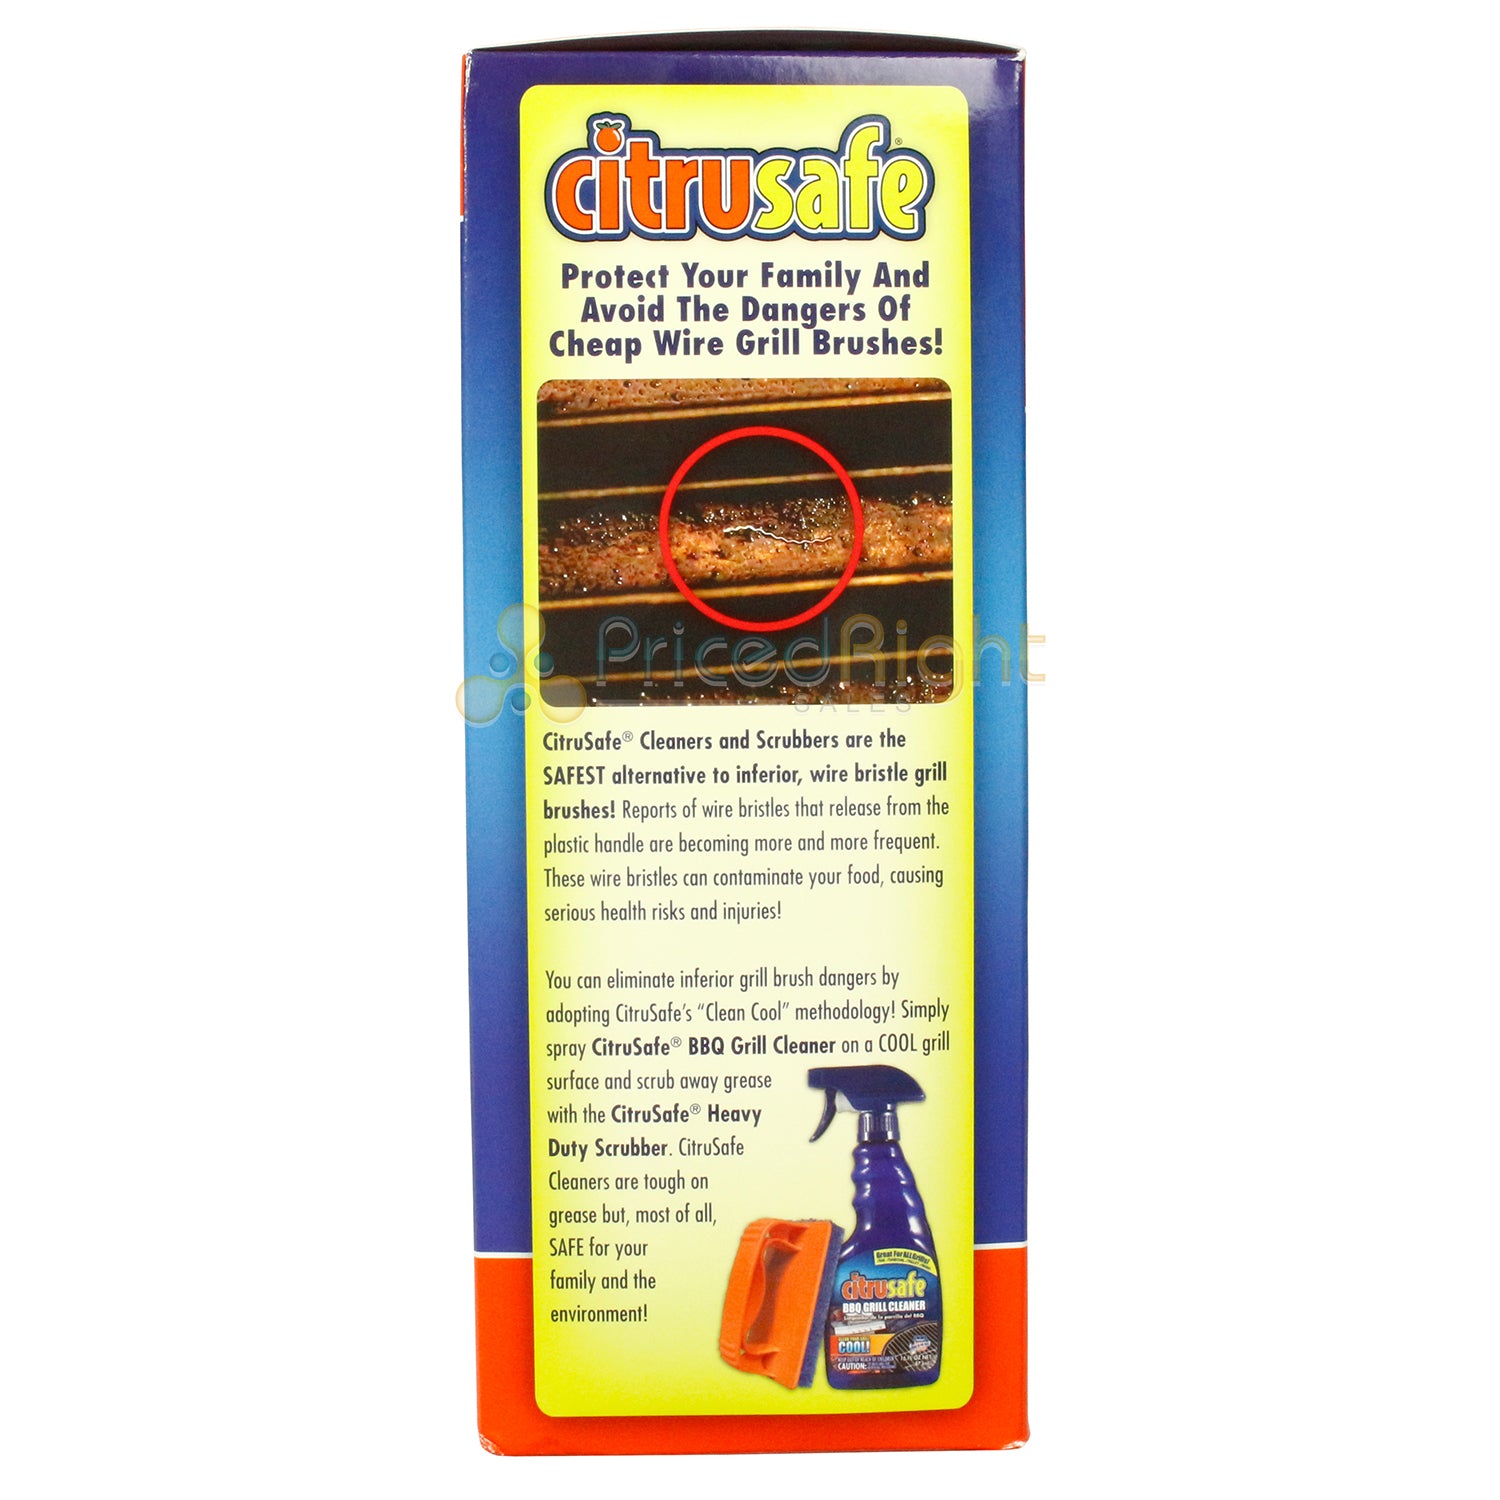 Citrusafe Basic Grill Care Kit Scrubber & Non-Toxic Cleaning Spray 16 Fl Oz